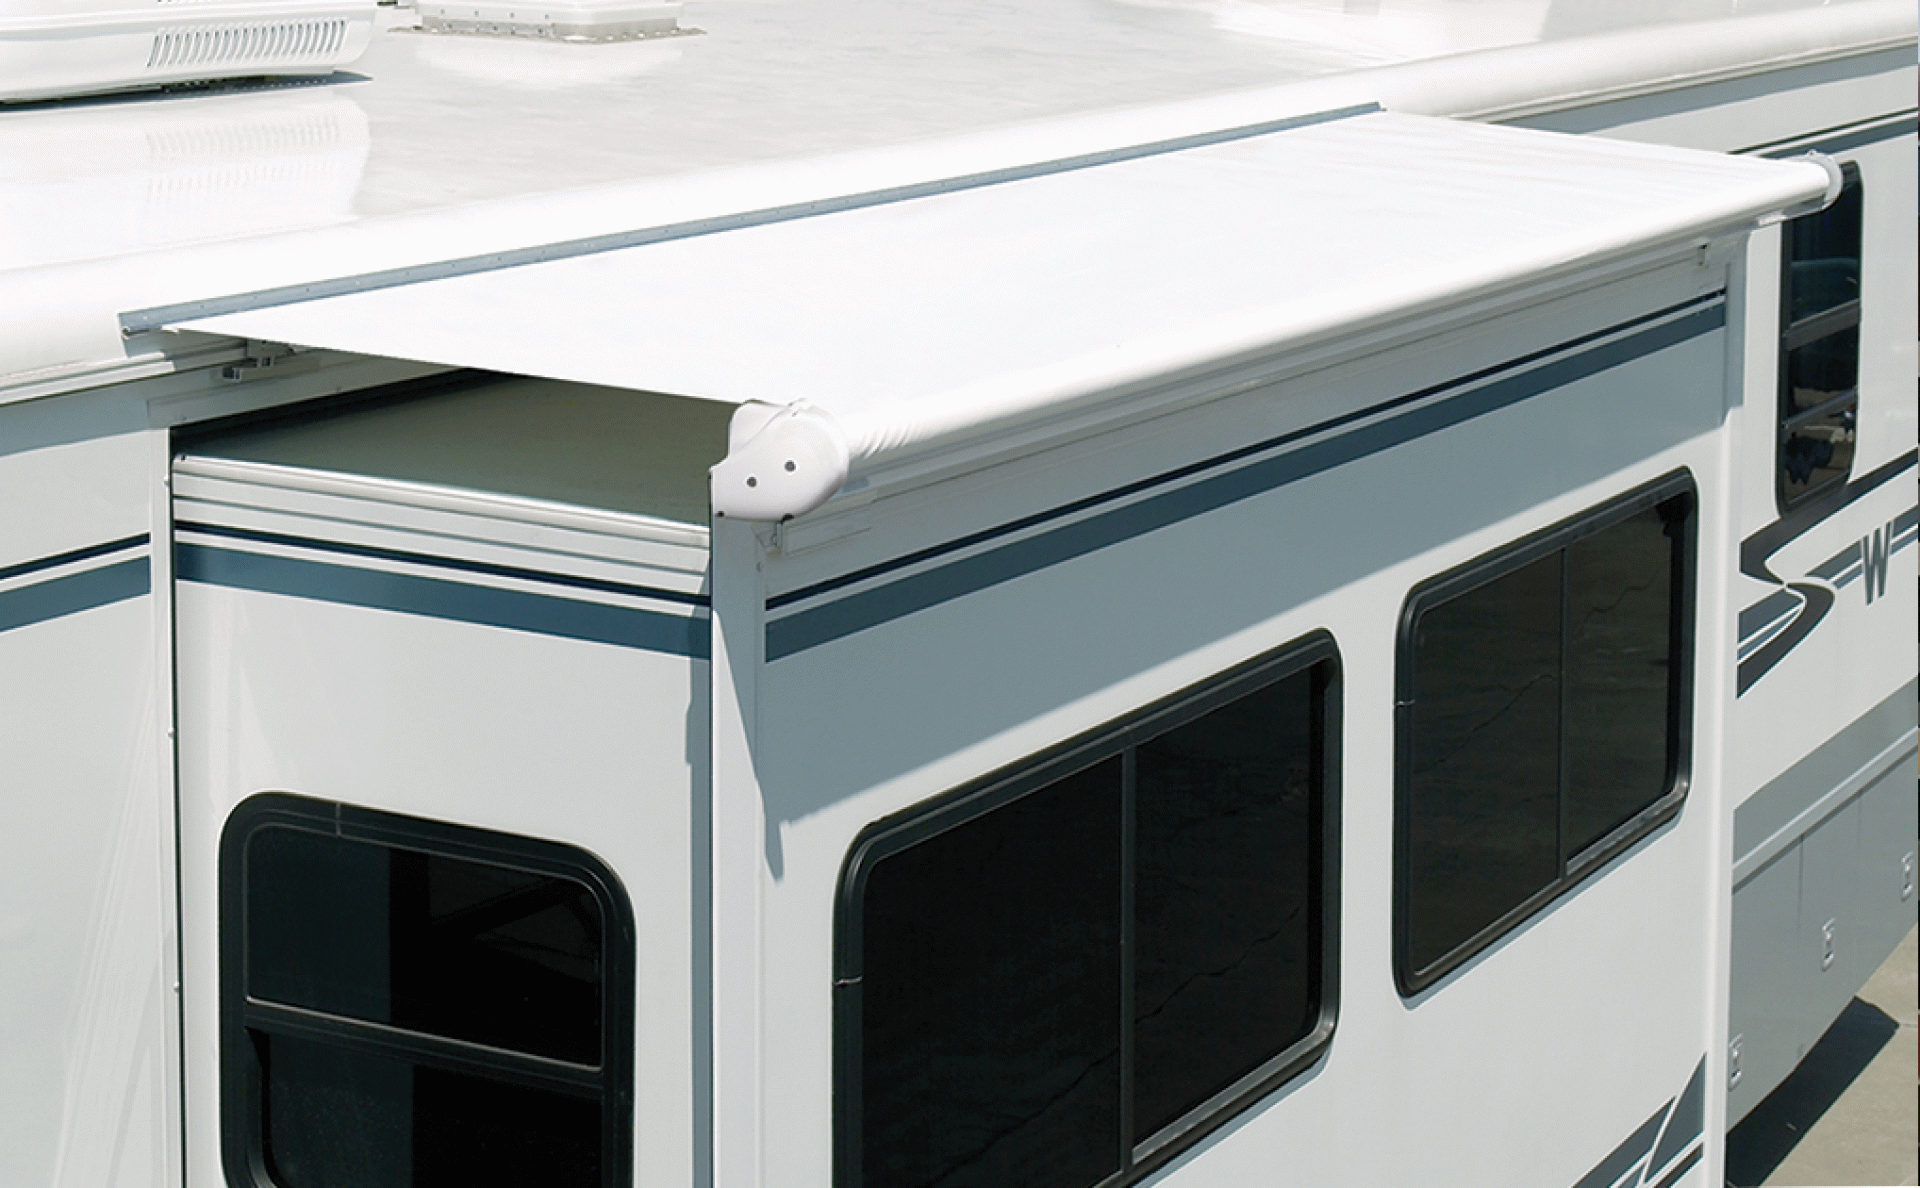 CAREFREE OF COLORADO | UQ1730025 | SIDEOUT KOVER III AWNING 166" - 173" ROOF RANGE WHITE VINYL FABRIC & DEFLECTOR